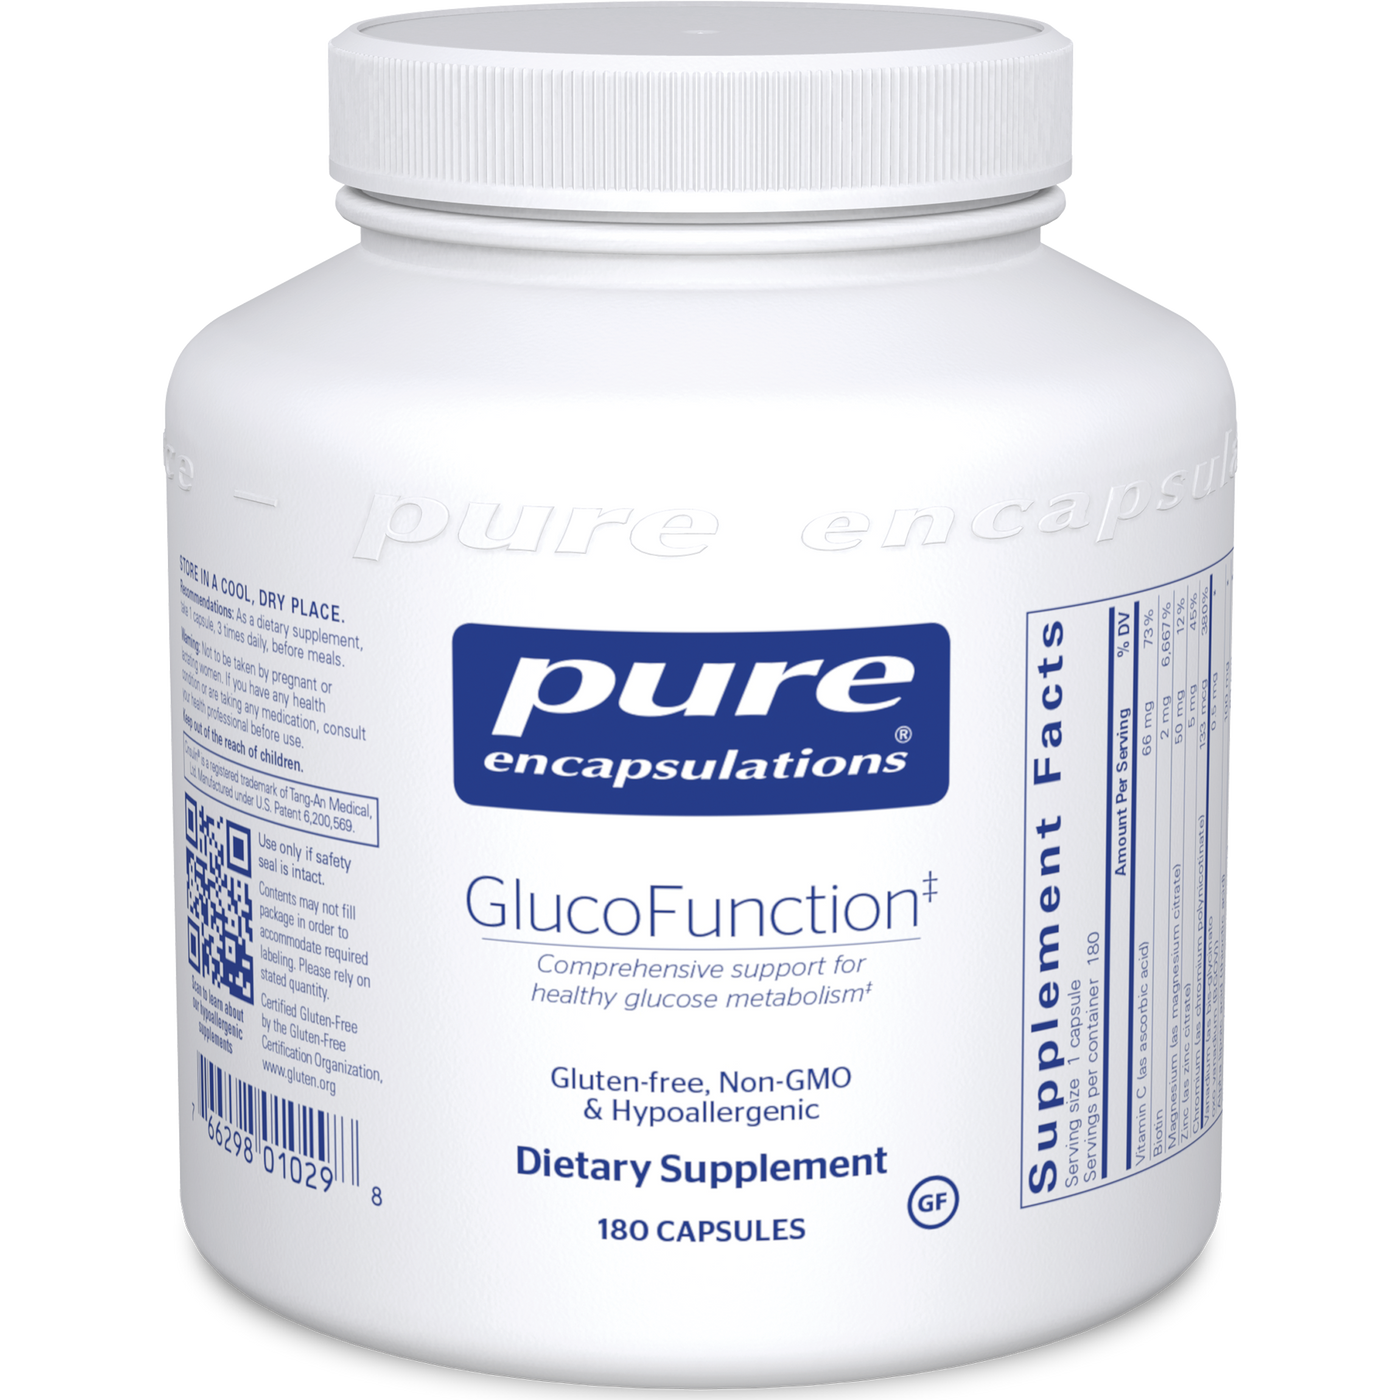 GlucoFunction 180 vcaps Curated Wellness